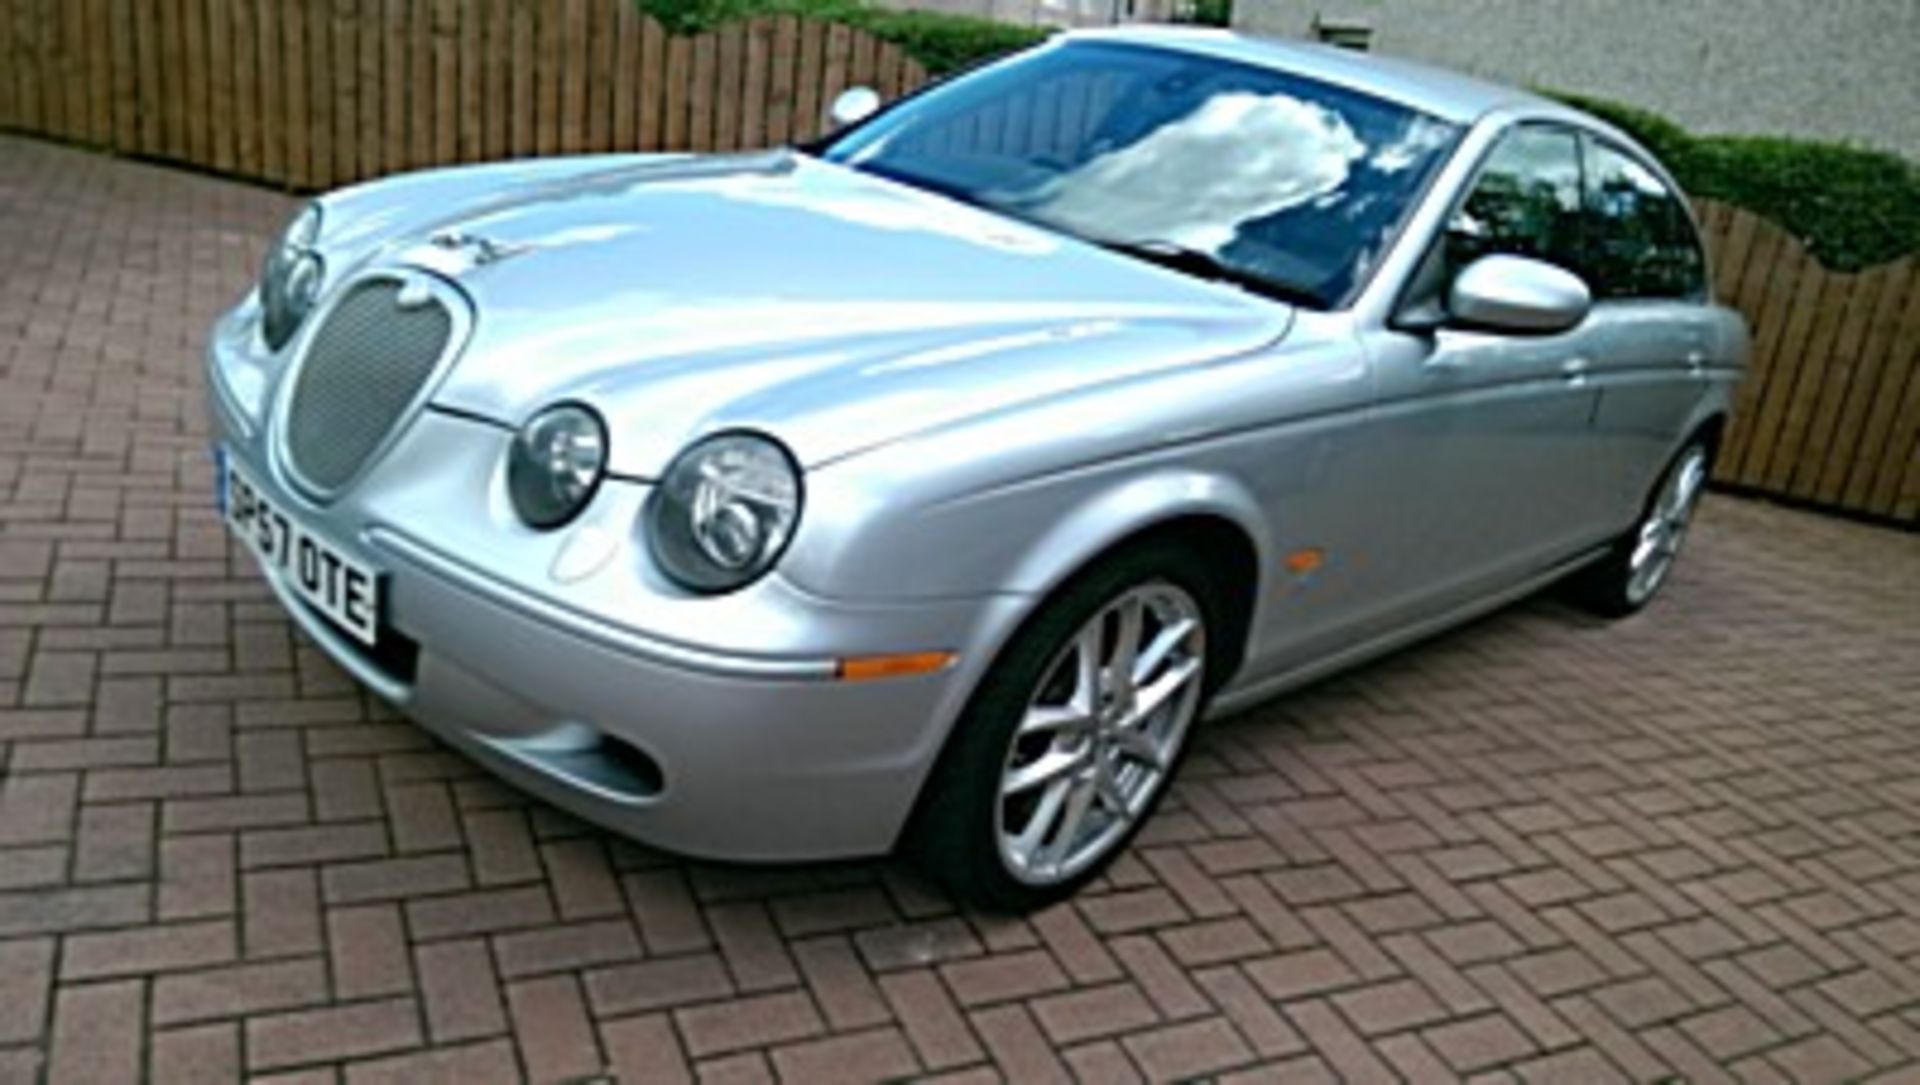 JAGUAR, S-TYPE R AUTO - 4196cc, Chassis number SAJAC03R281N91185 - this is a dealership special